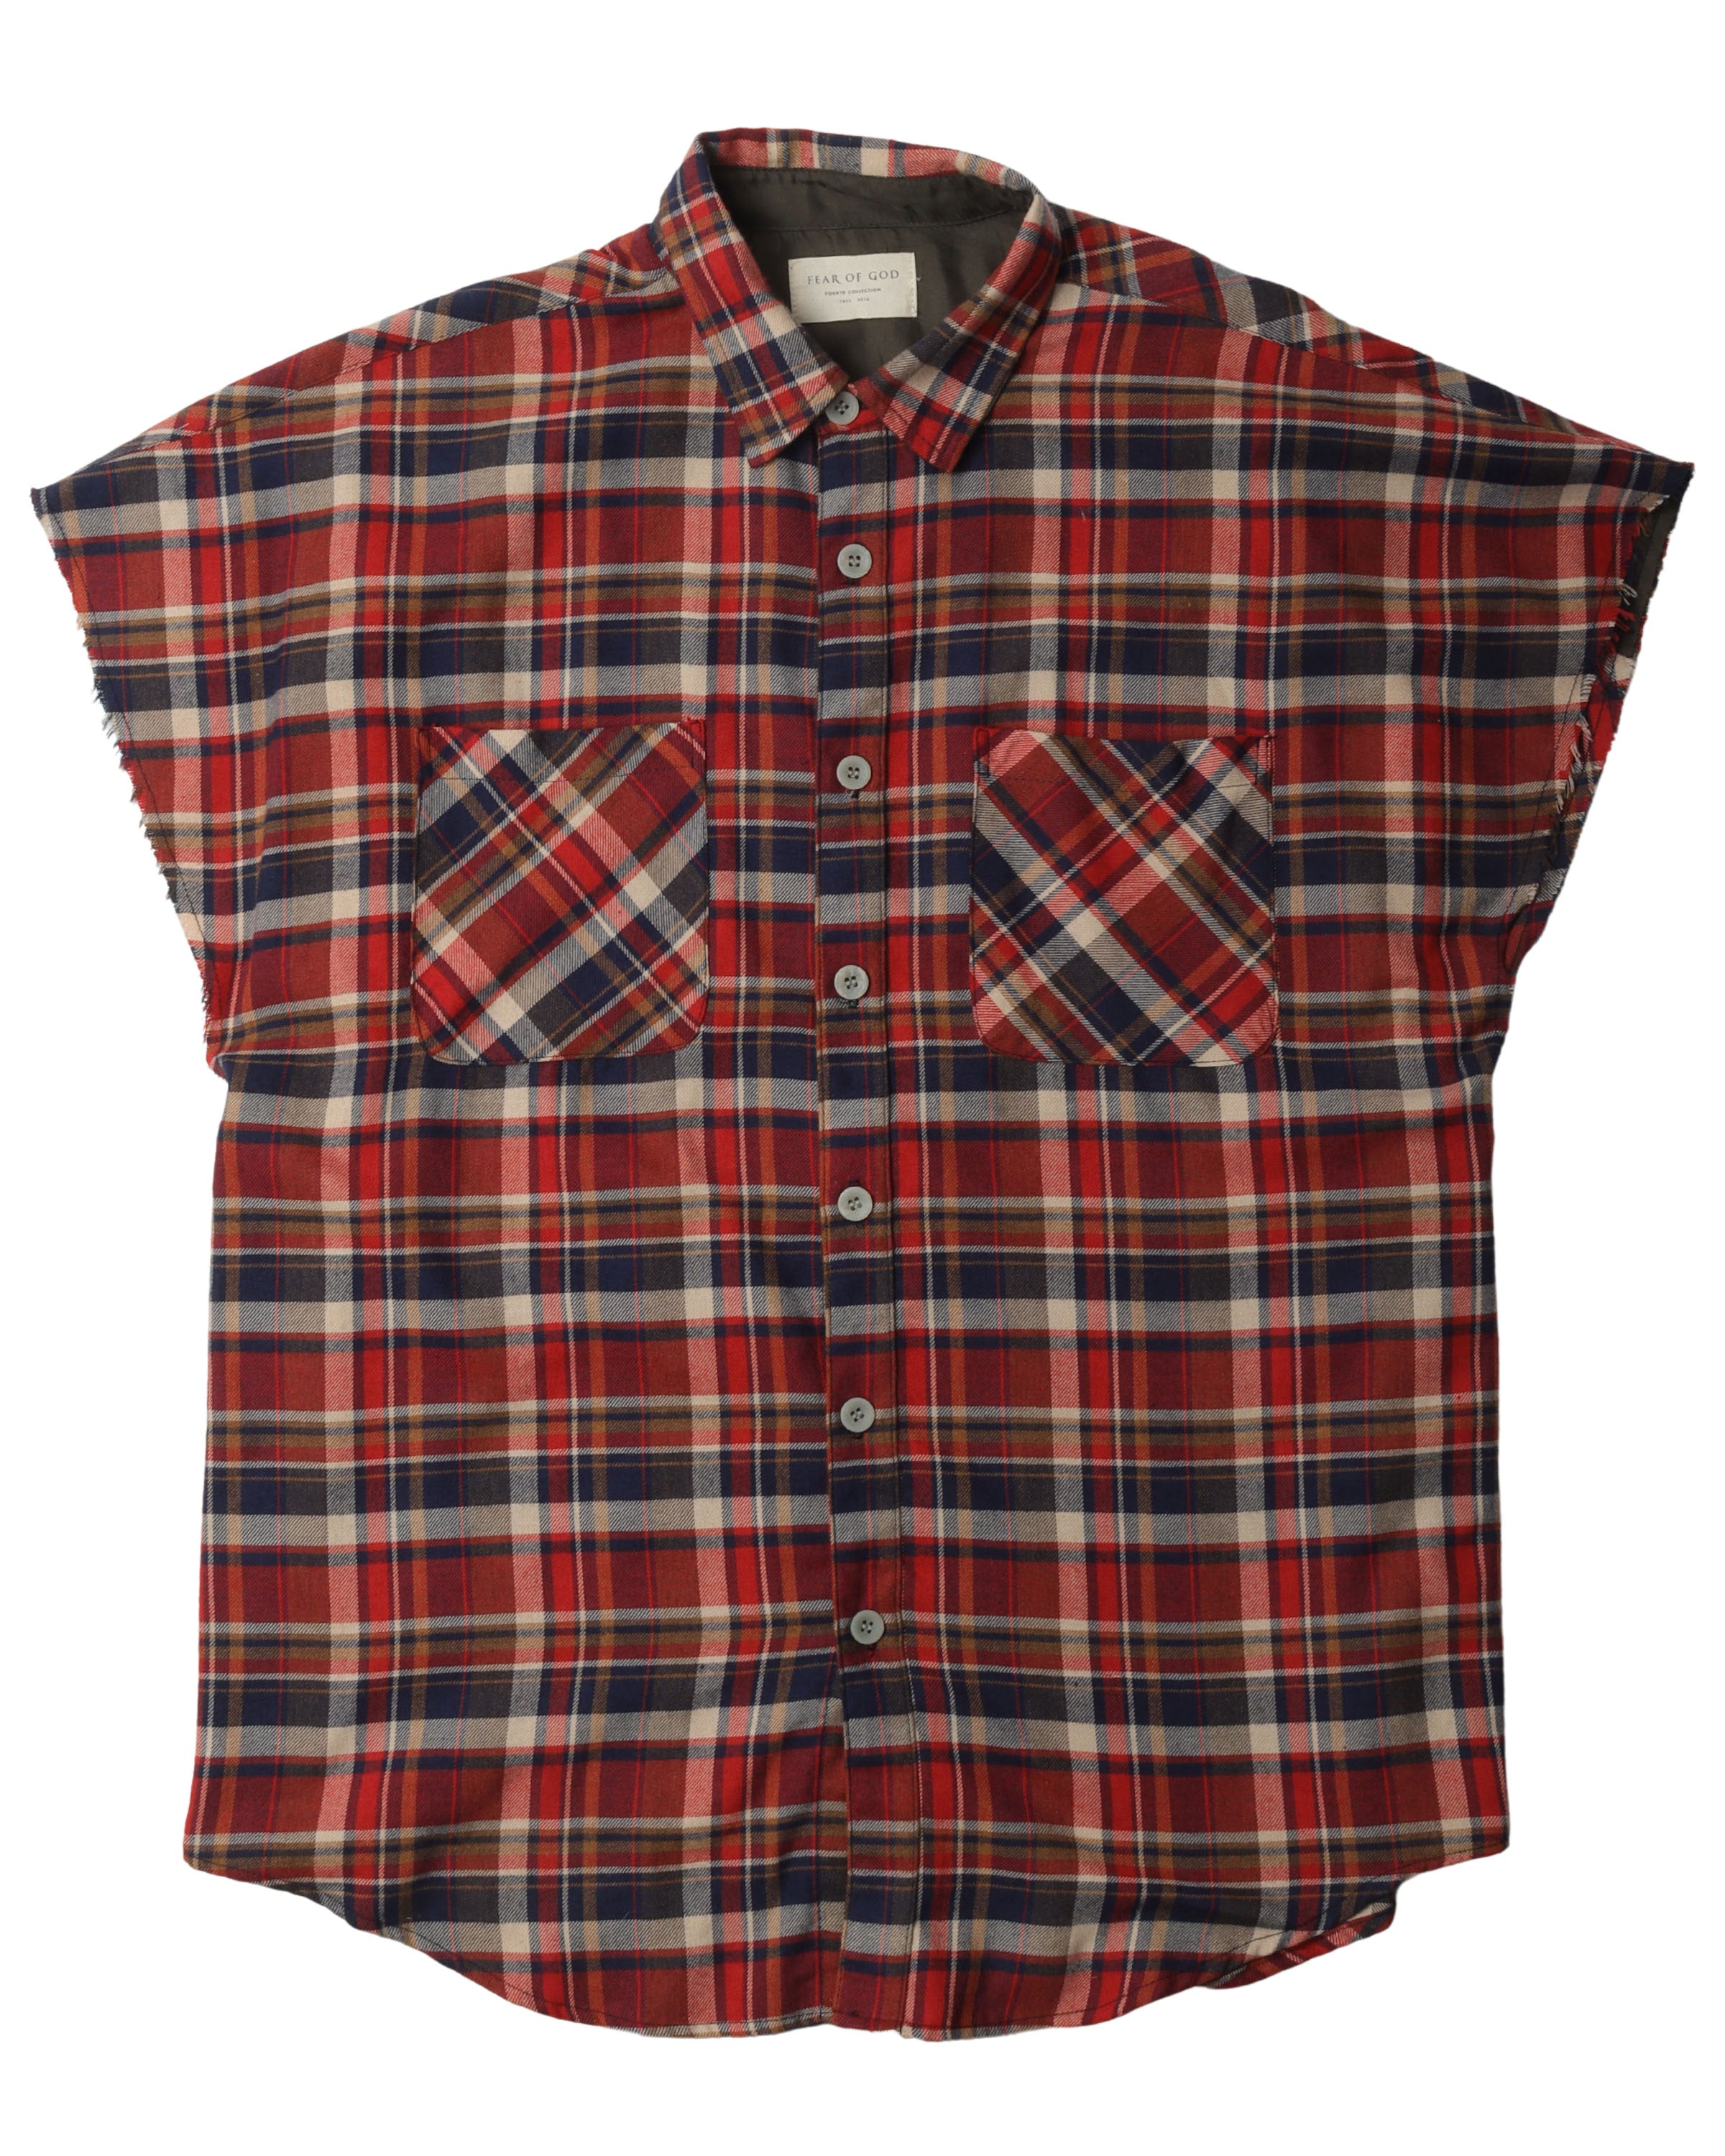 Fear of God Fourth Collection Sleeveless Flannel Shirt